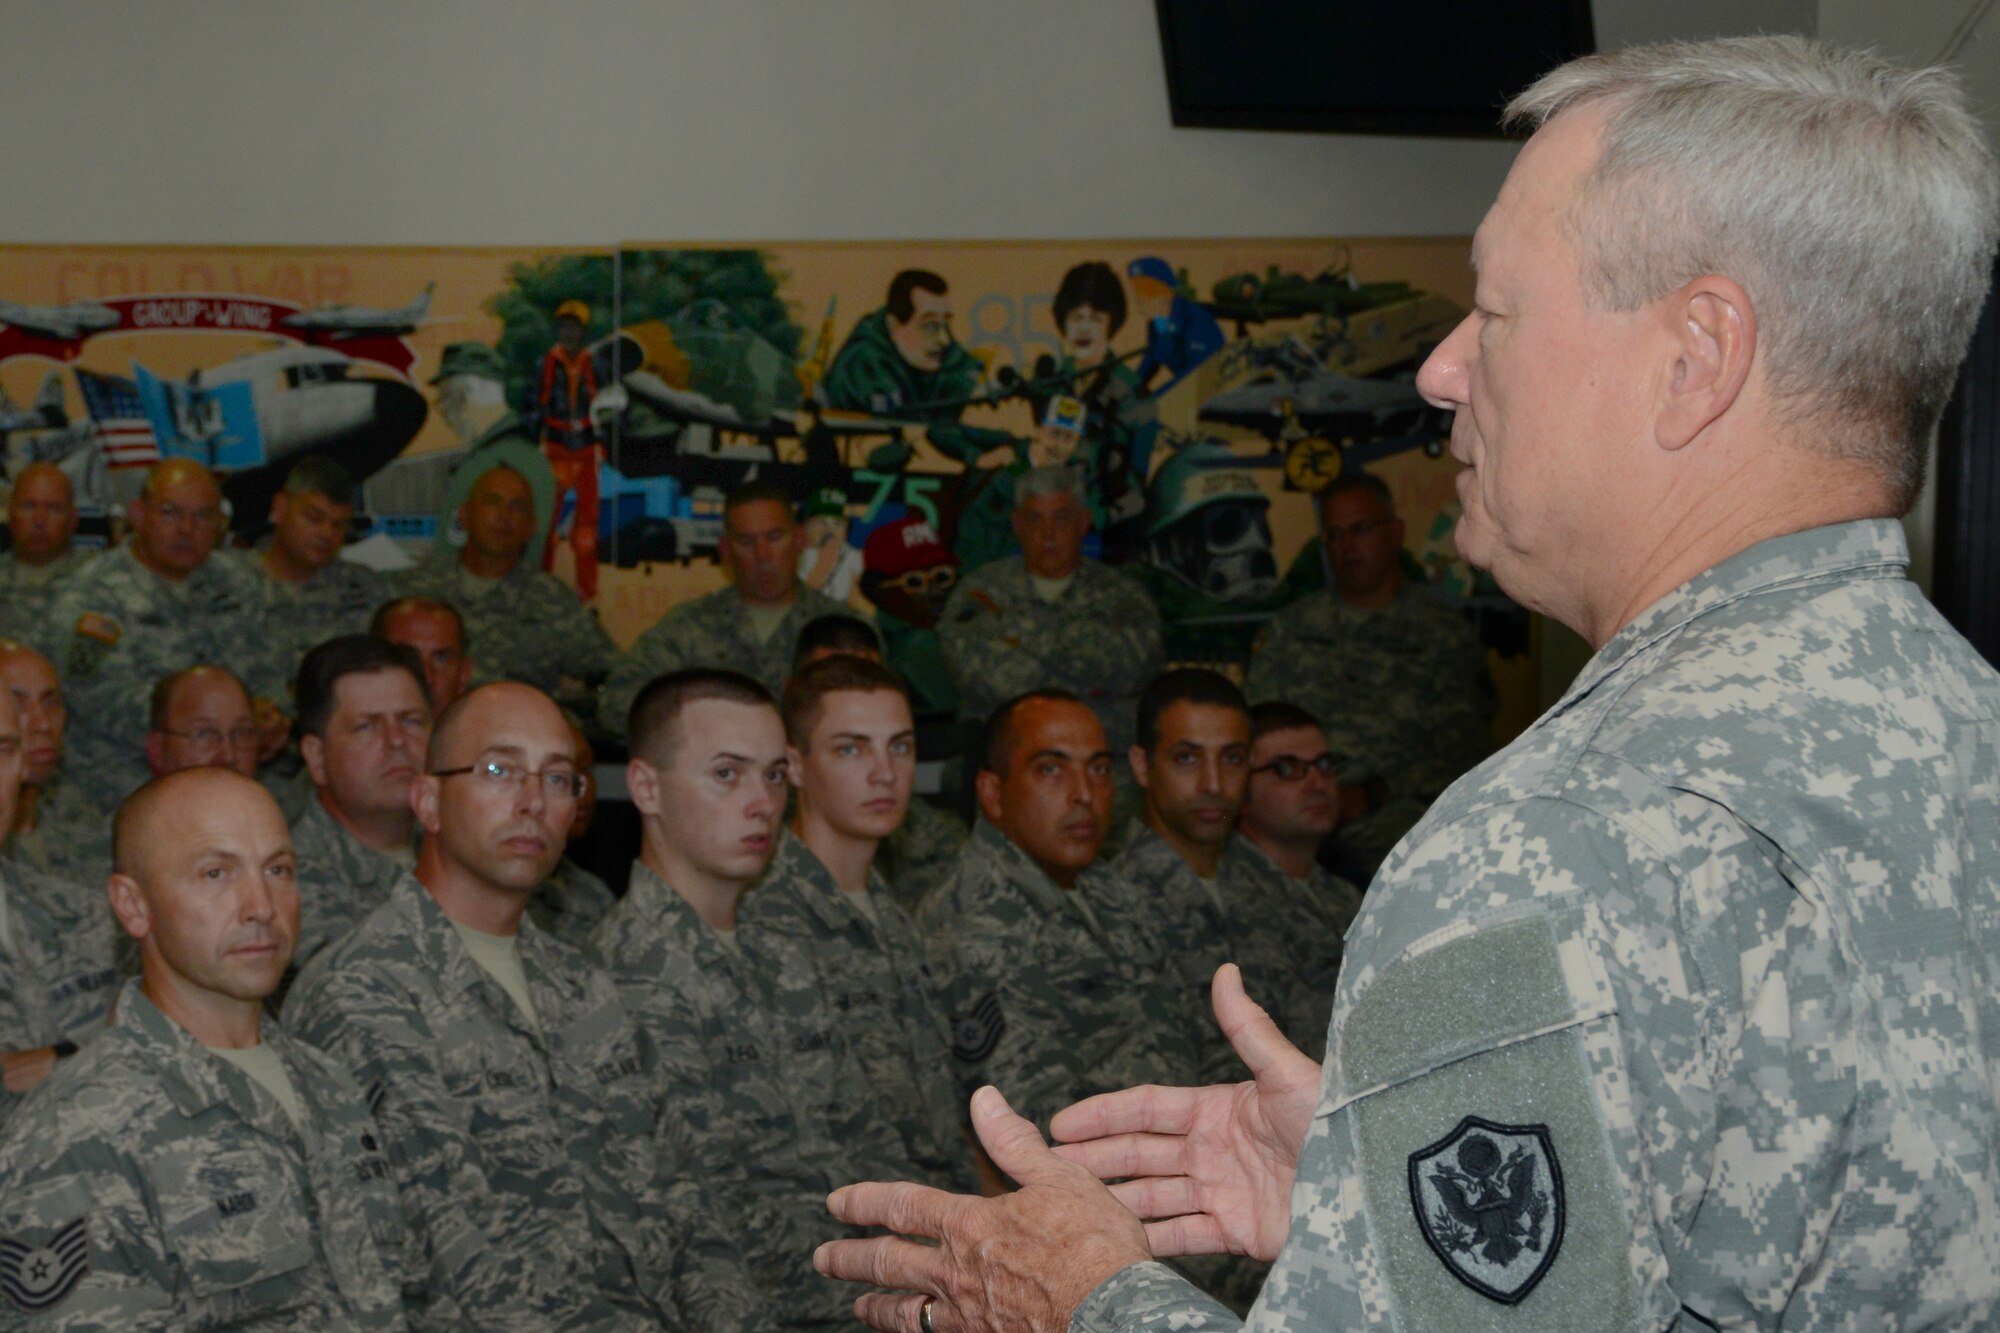 Chief of the National Guard Bureau General Frank J. Grass conducts a town hall meeting, emphasizing the importance of being in the Guard for Airmen at Bradley Air National Guard Base, East Granby, Conn, Sept. 9, 2014. This was the first time a Chief of the National Guard Bureau visited the Flying Yankees. (U.S. Air National Guard photo by Senior Airman Emmanuel Santiago)